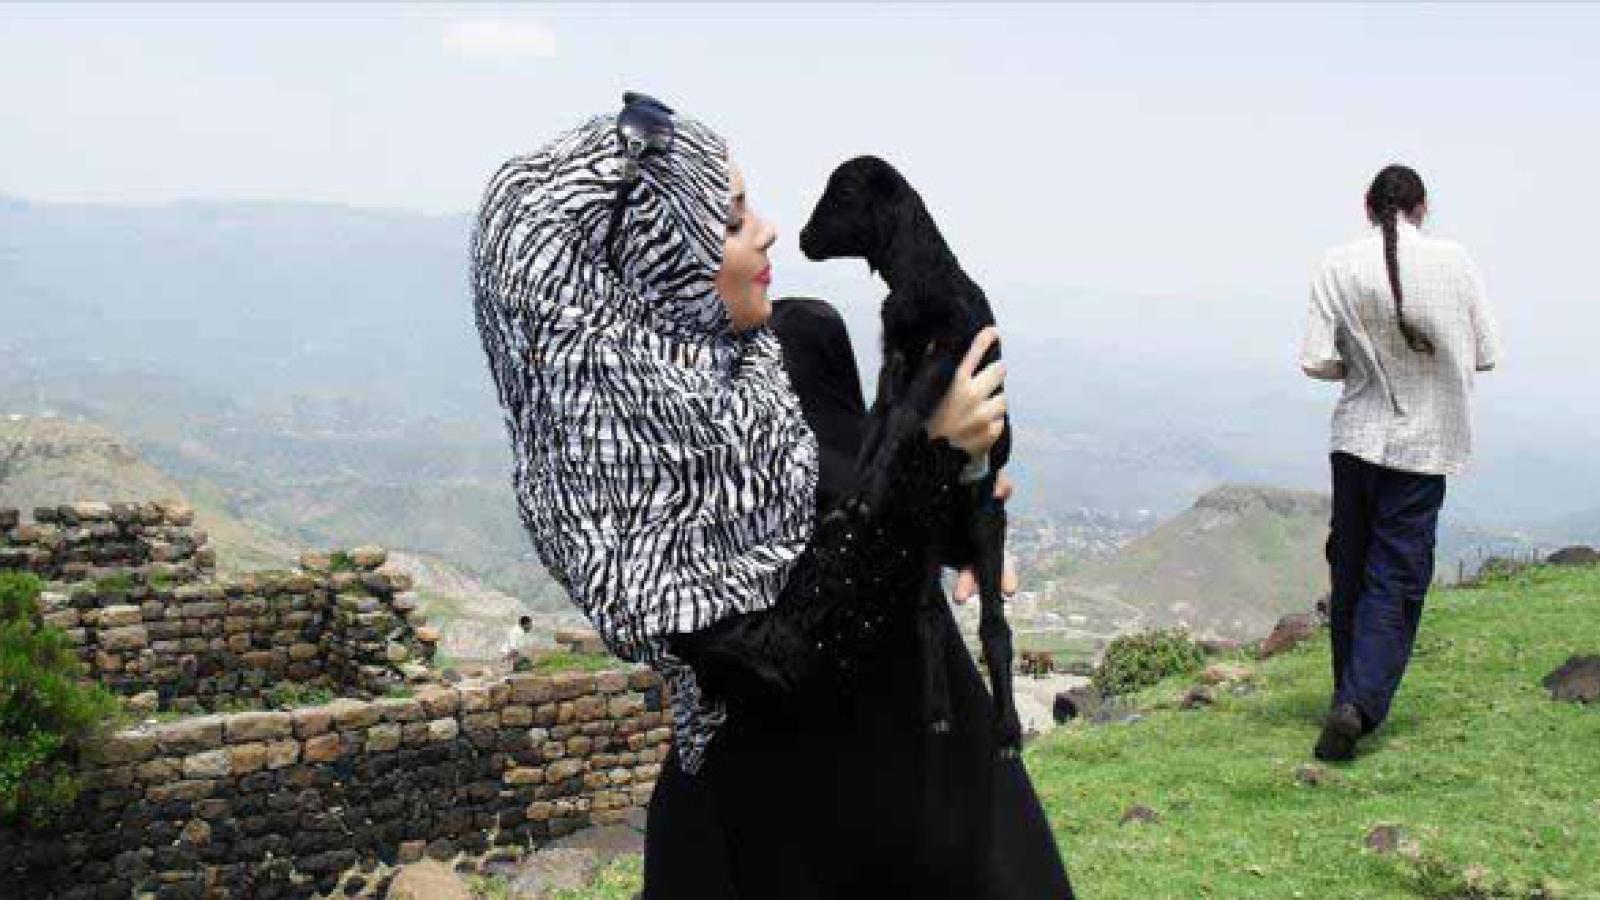 Imaan Ali with a baby lamb on a mountain side in Yemen.